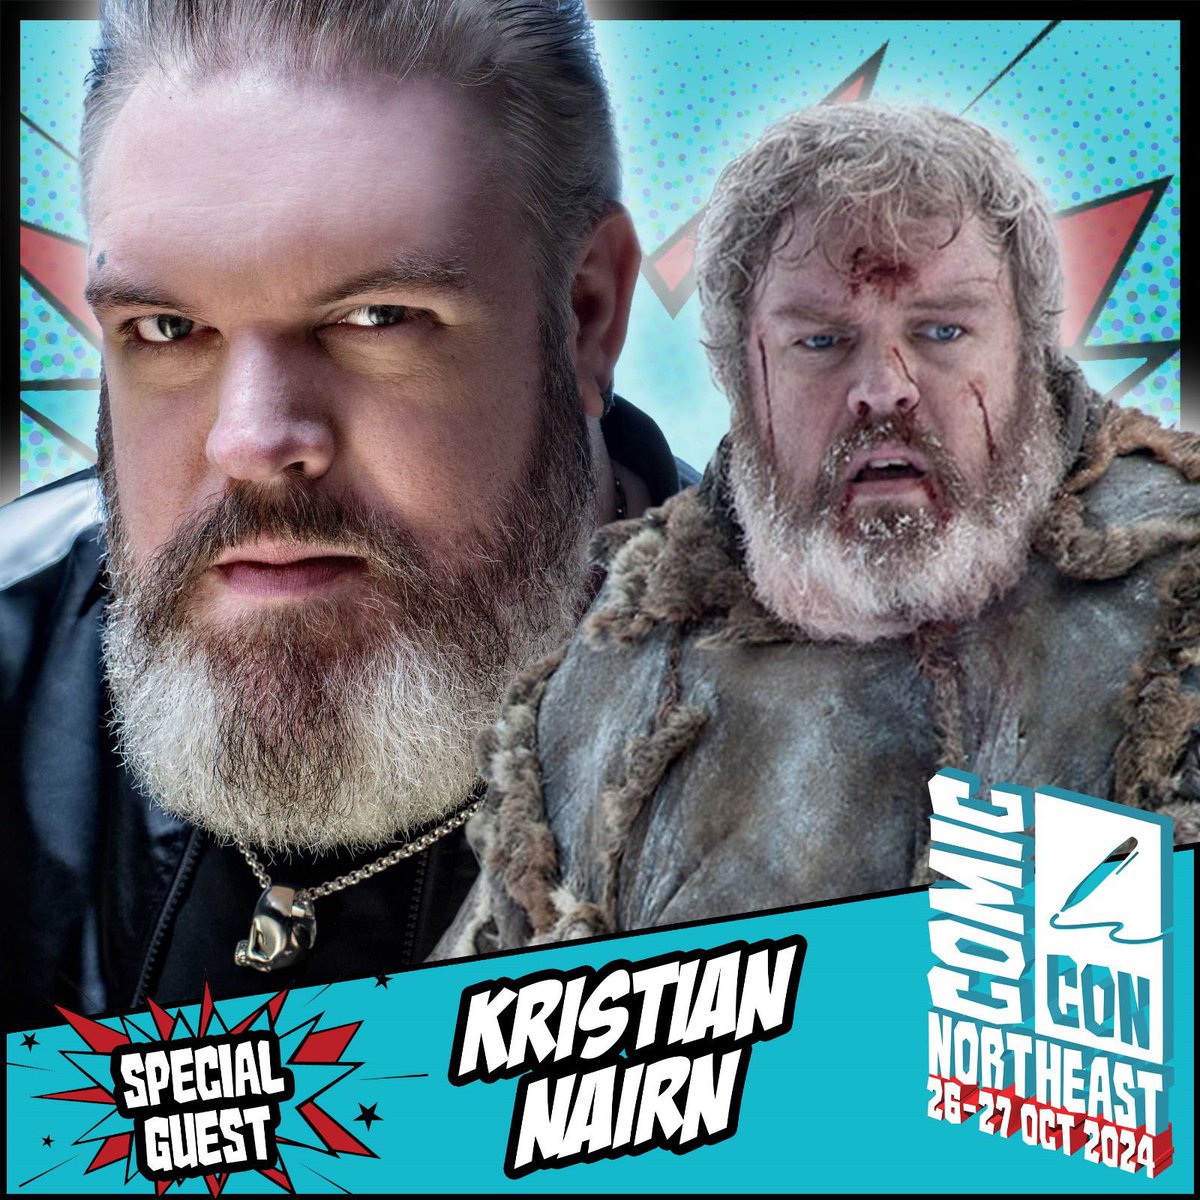 Comic Con North East welcomes Kristian Nairn, known for projects such as Game of Thrones, Our Flag Means Death, Robin Hood: The Rebellion, and many more. Appearing 26-27 October! Tickets: comicconventionnortheast.co.uk